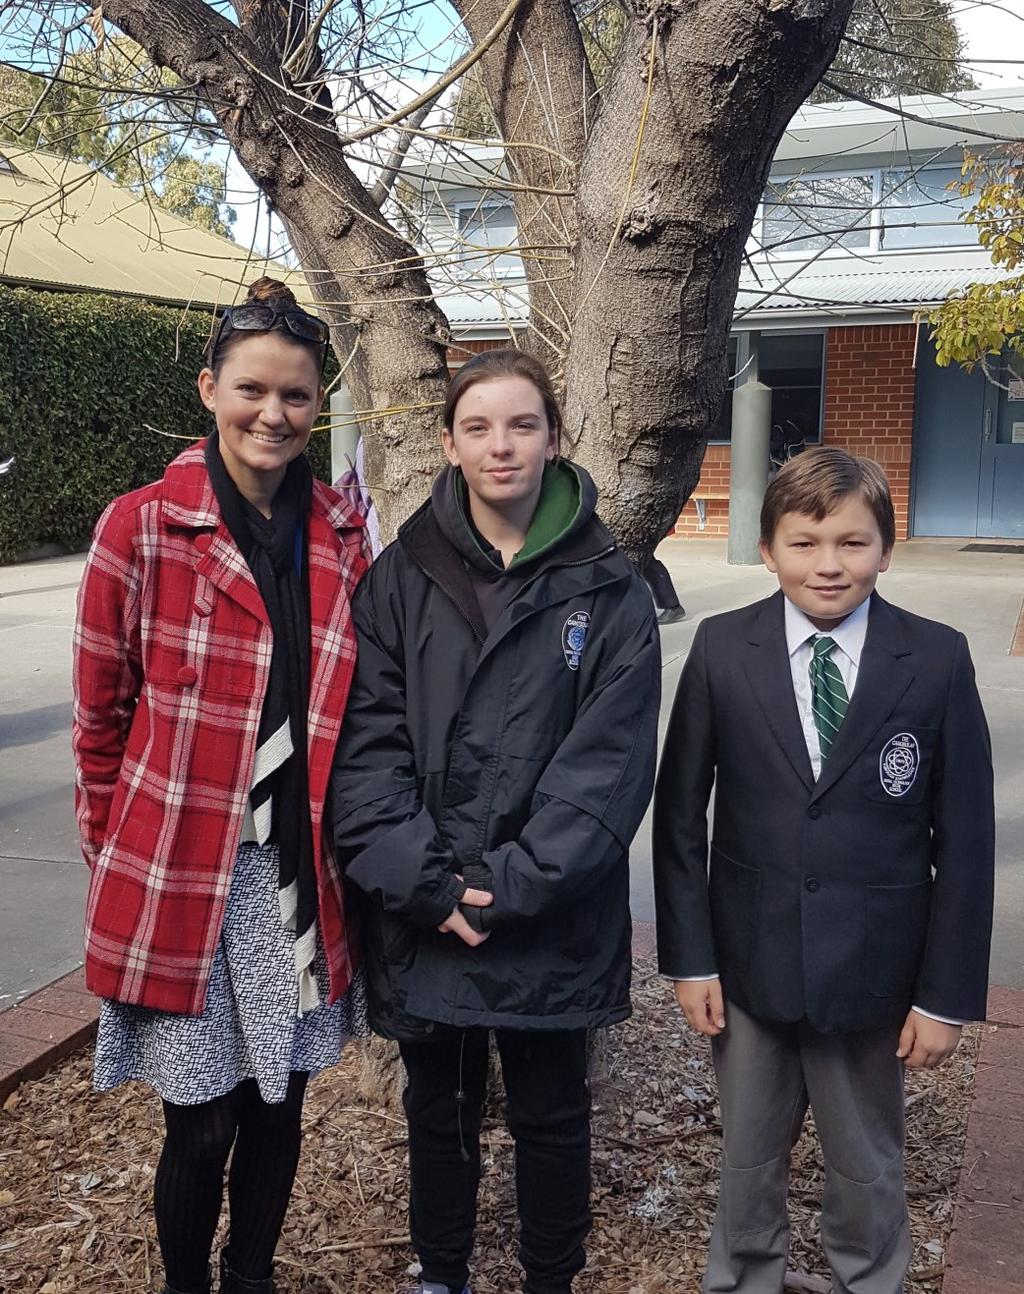 A big congratulations must also go to our junior and senior debating teams who competed in the Lithgow Festival of Speech last week.